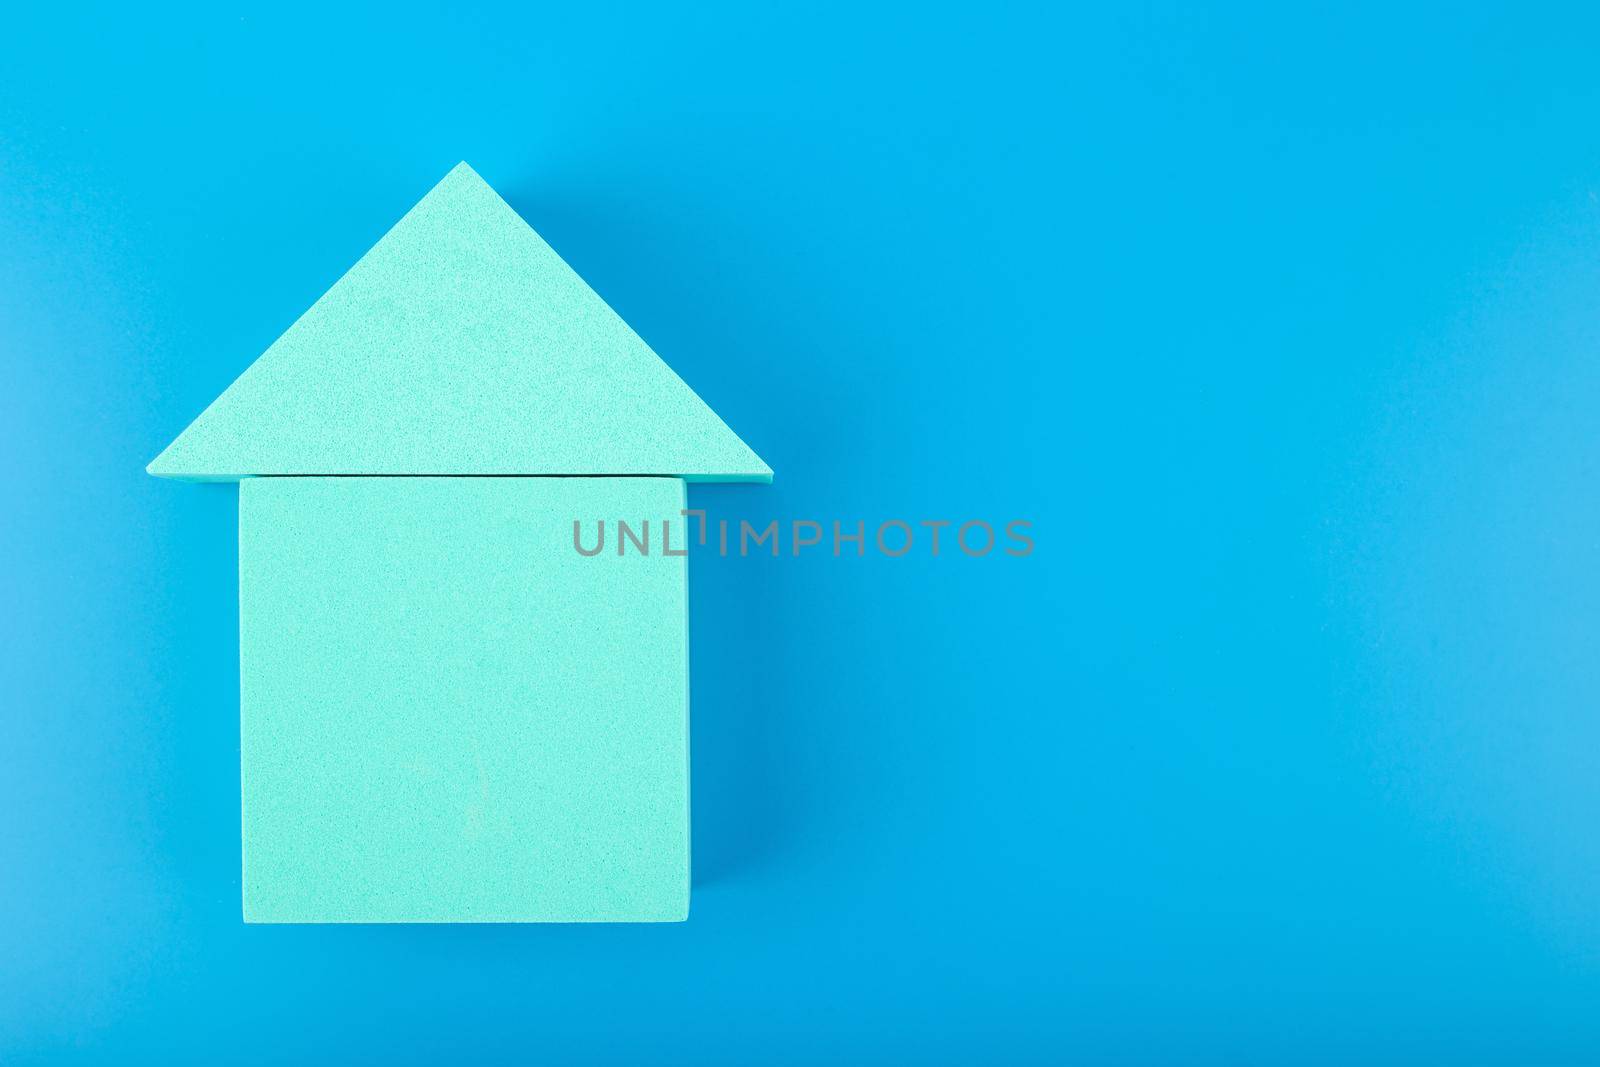 Mortgage, loan or saving money for home and investing in real estate trendy concept. Bright aqua blue toy house on blue background with copy space